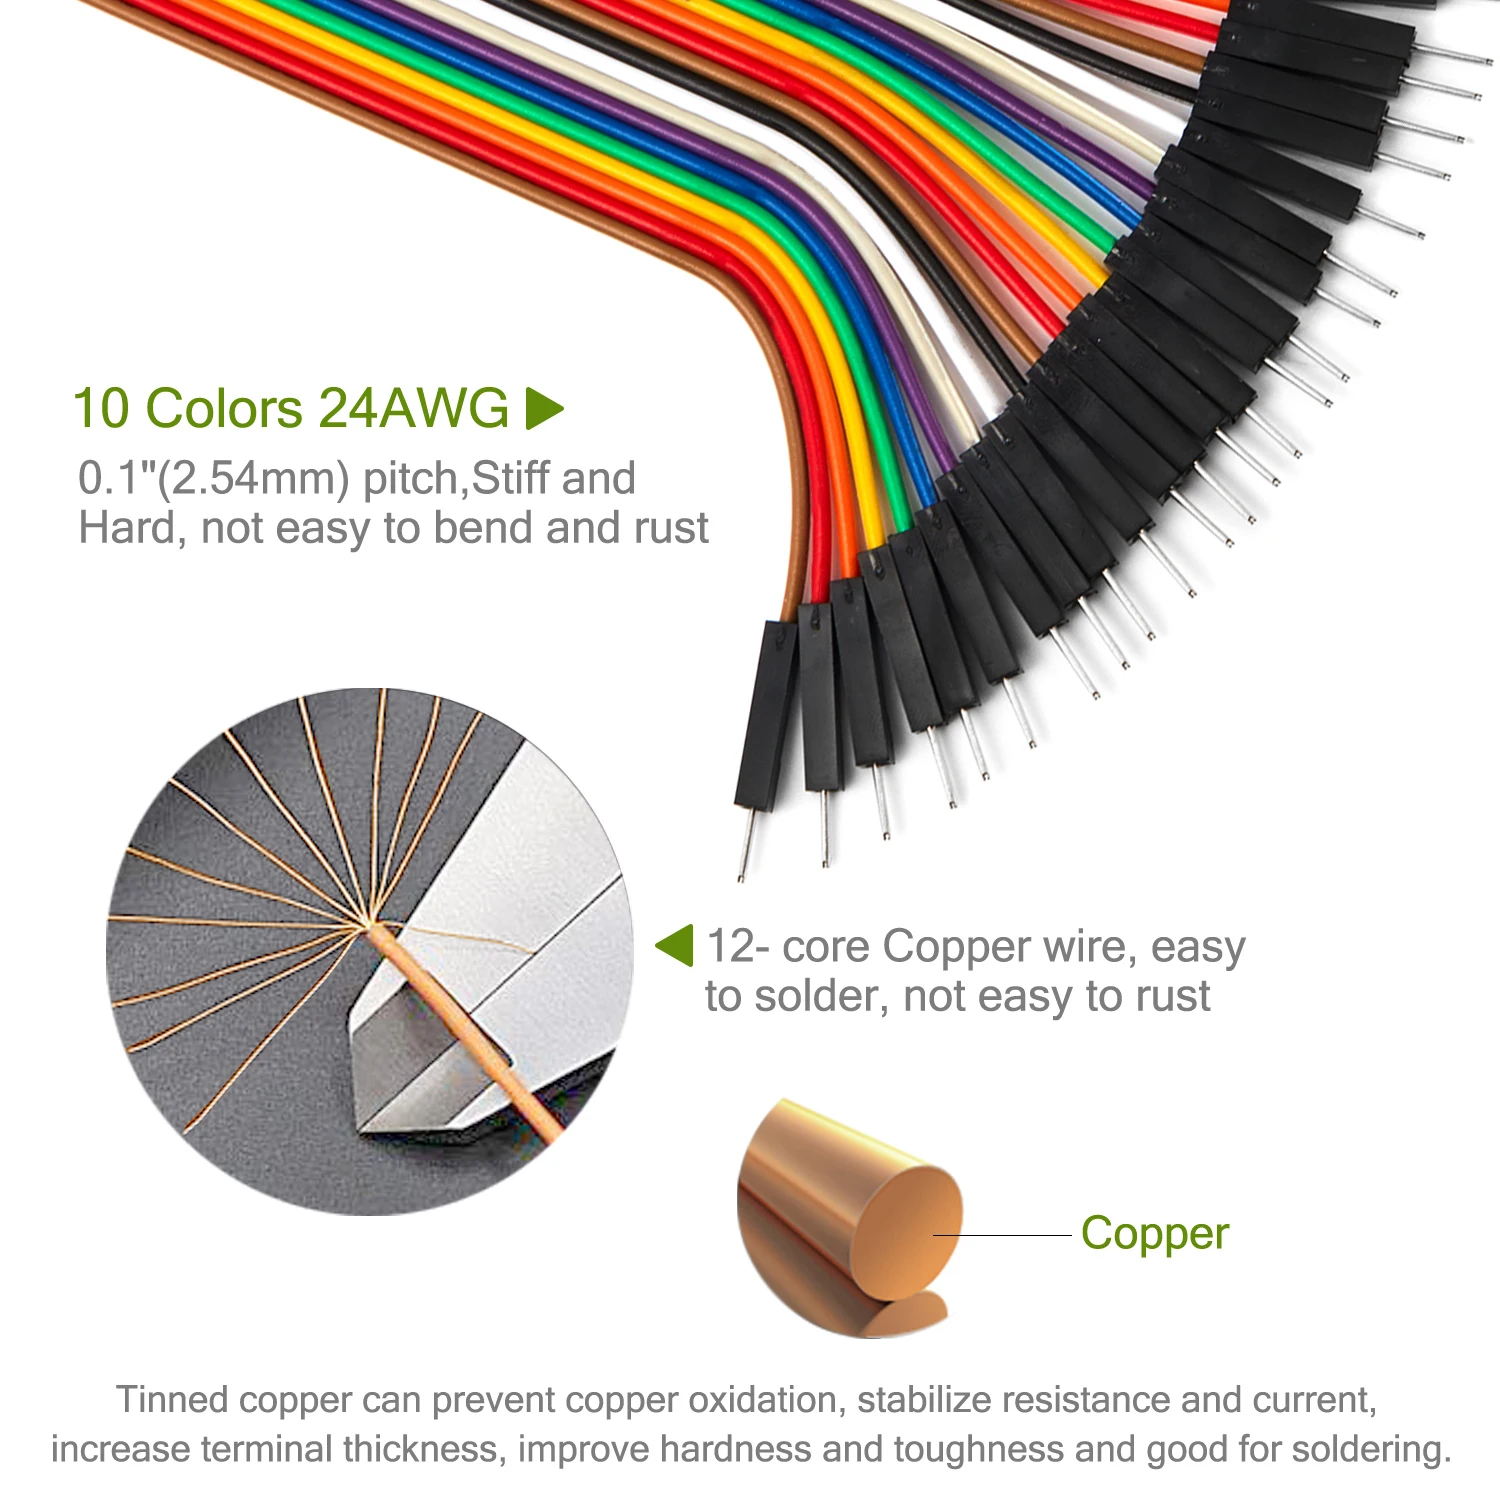 Copper Jumper Wire Dupont Cable 10cm 20cm 30cm Male Female 24AWG Solderless Flexible Line Connector for DIY Arduino Breadboard